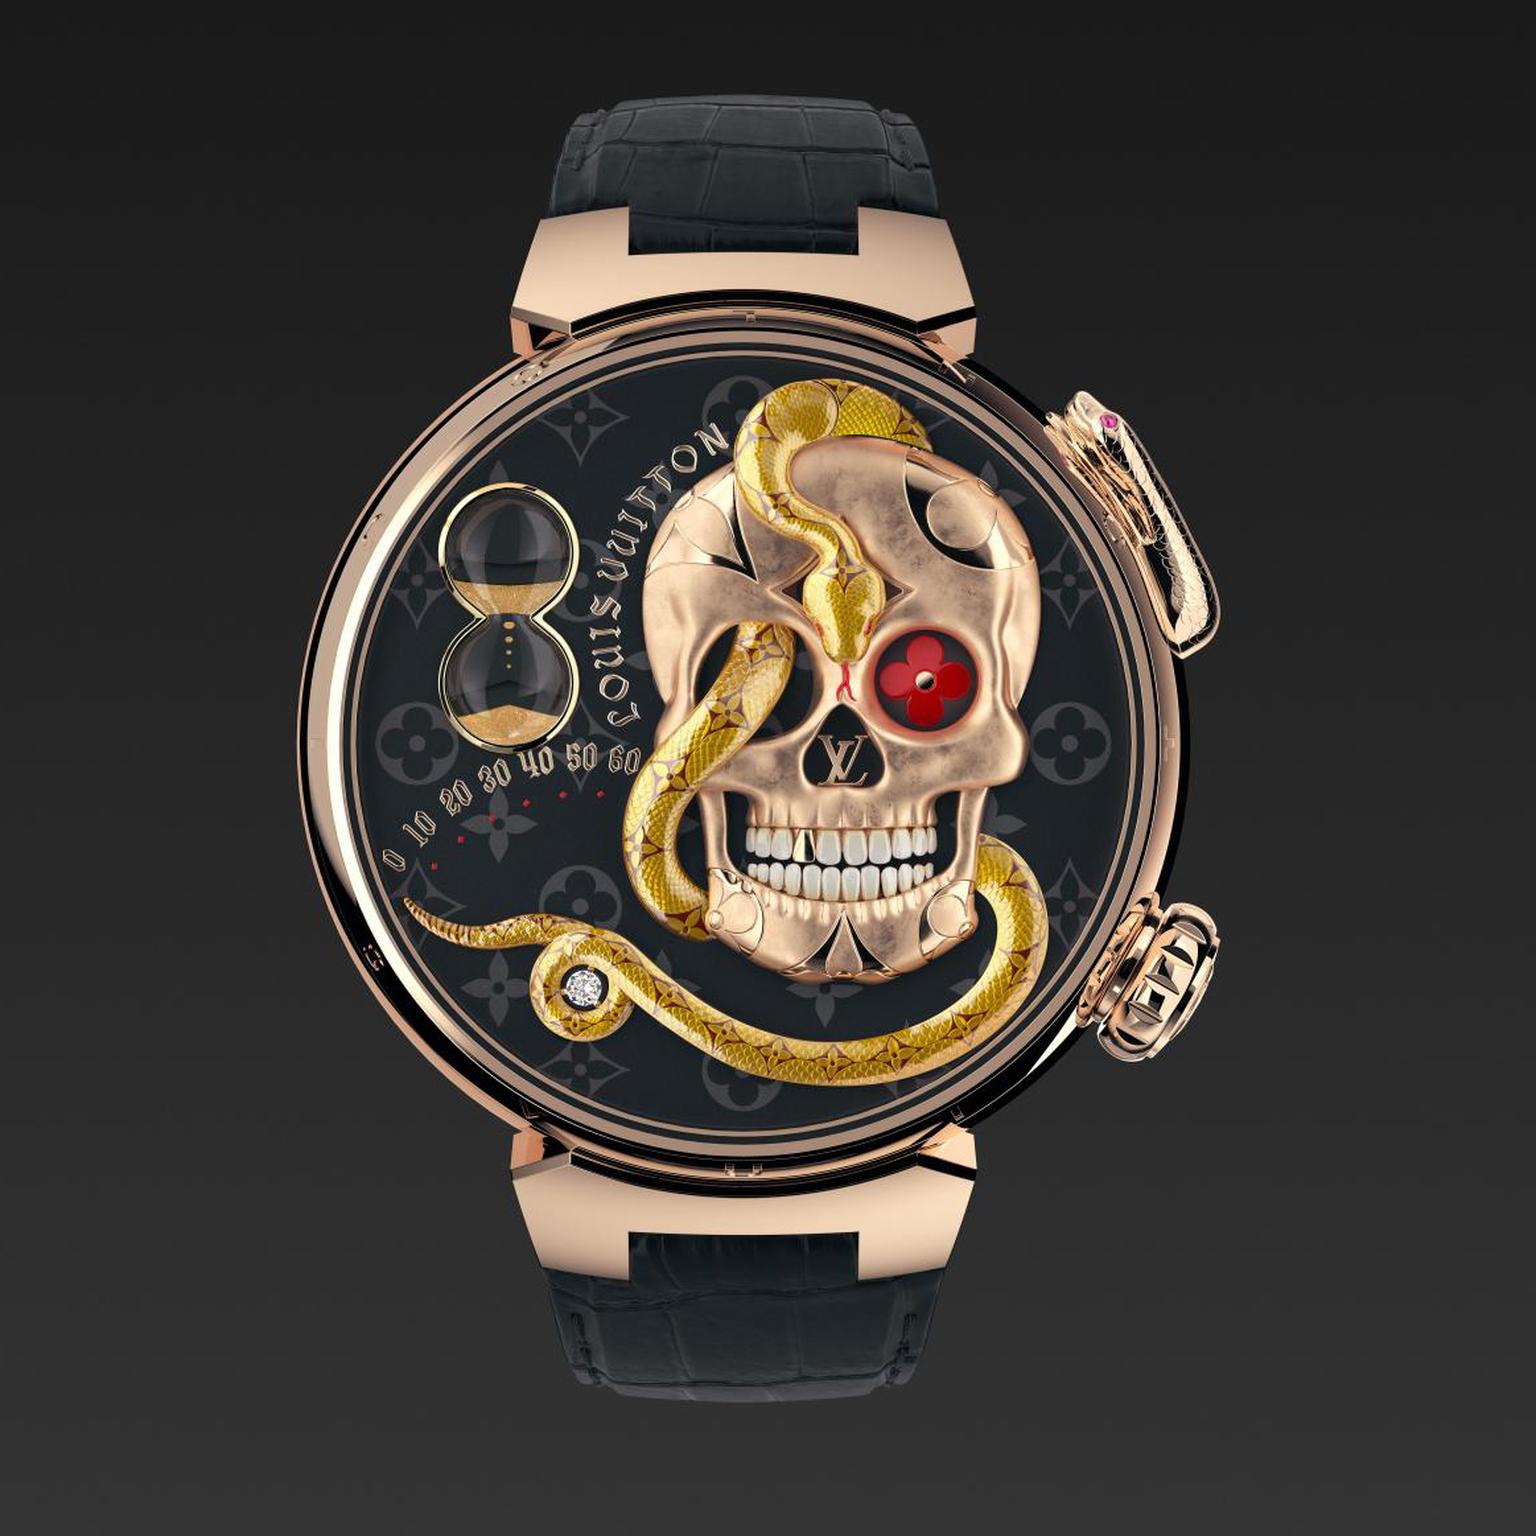 Louis Vuitton's Tambour Timepieces Reflect High Watchmaking At Its Best